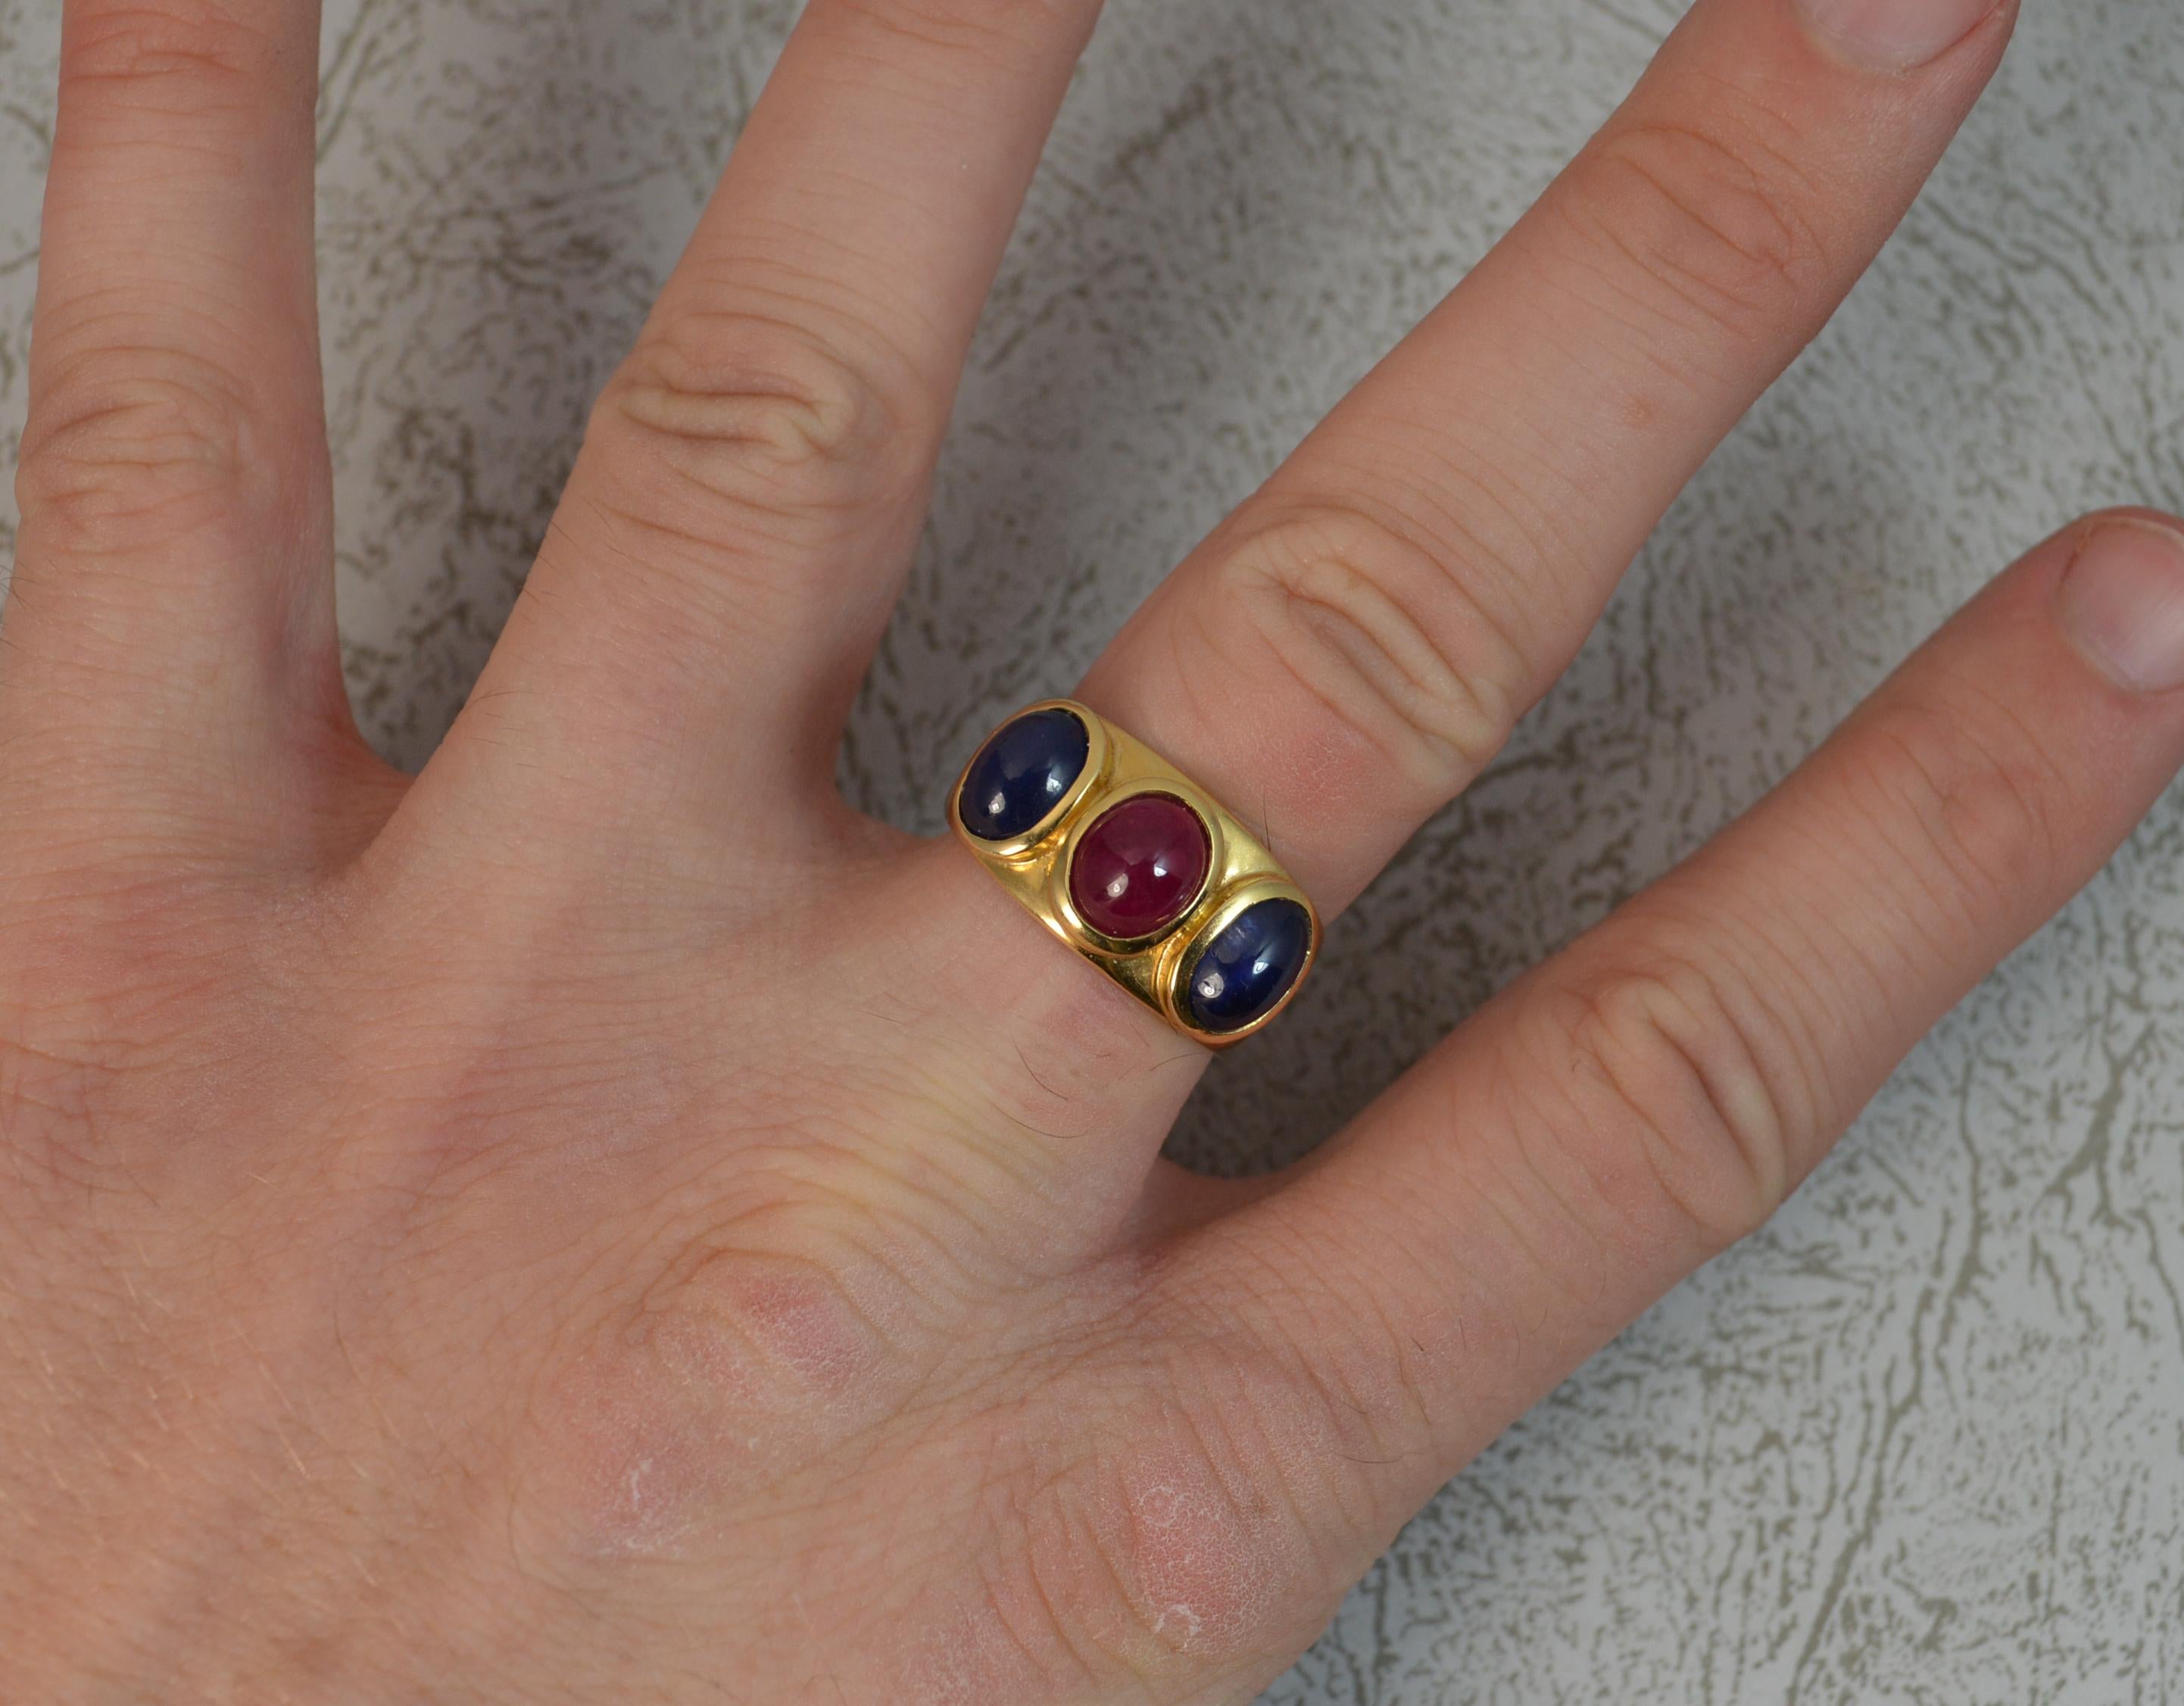 A fantastic Ruby and Sapphire three stone ring.
Solid 18 carat yellow gold example with fine bezel settings.
6.3mm x 8mm ruby. 6mm x 8mm sapphires. Approx.
19mm spread of stones. 10.5mm wide band.

CONDITION ; Excellent. Clean and solid band. Well